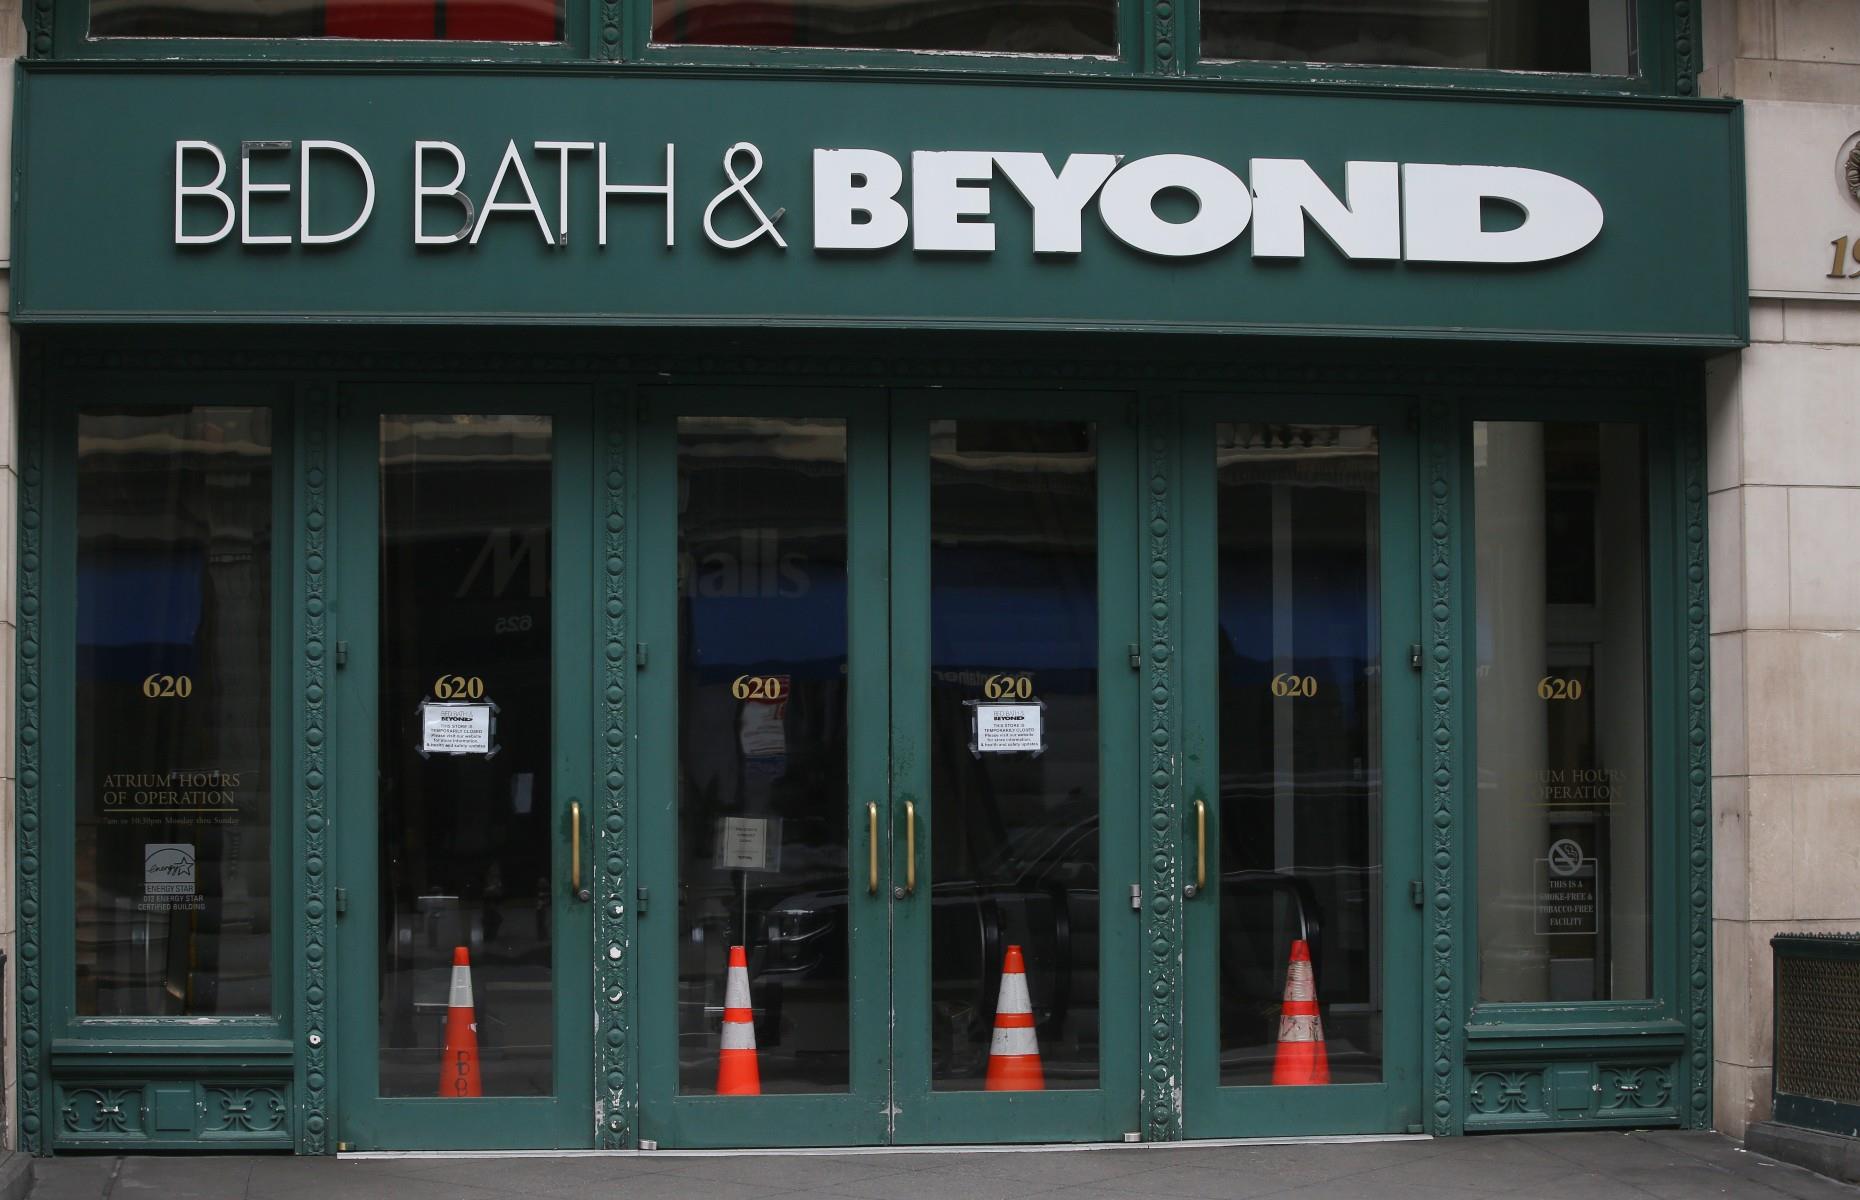 Bed Bath & beyond: 237 stores 